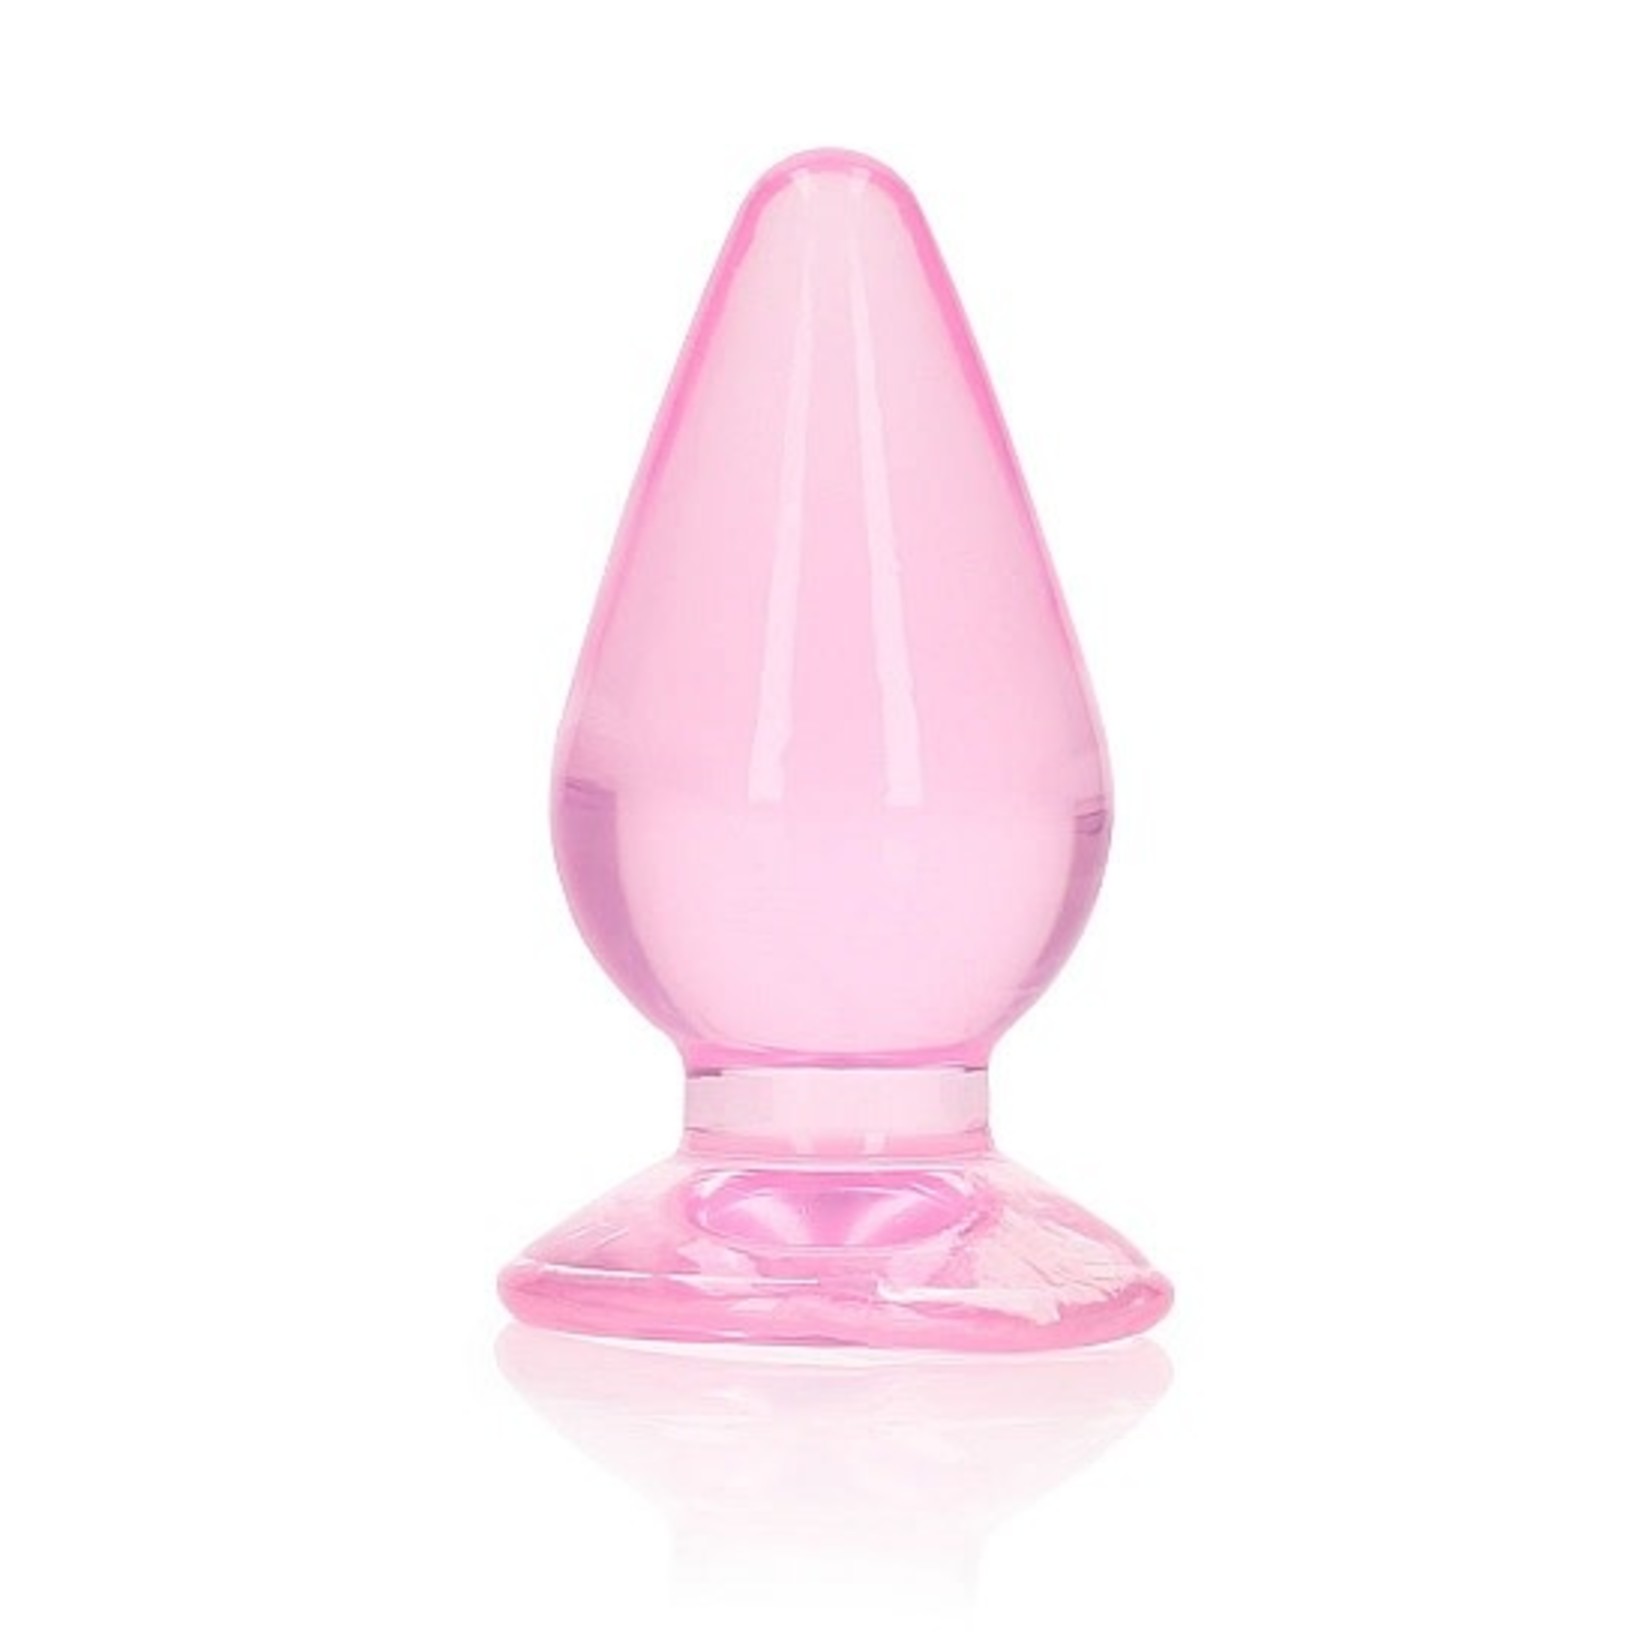 SHOTS REALROCK CRYSTAL CLEAR JELLY 3.5 INCH BUTT PLUG